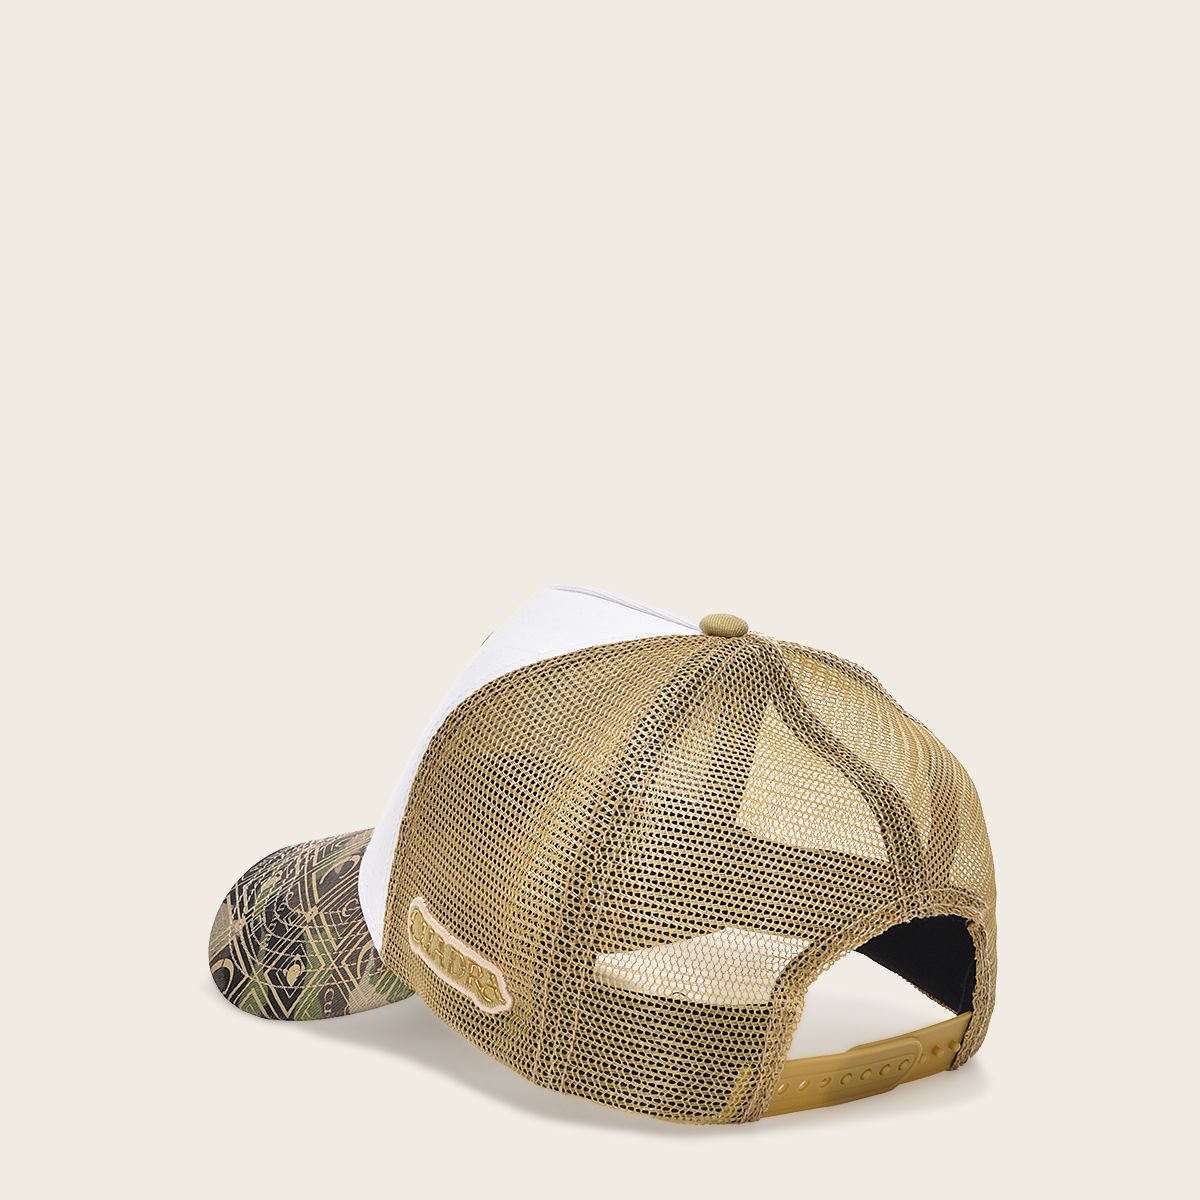 Cuadra camouflage cap with embroidery deer patch